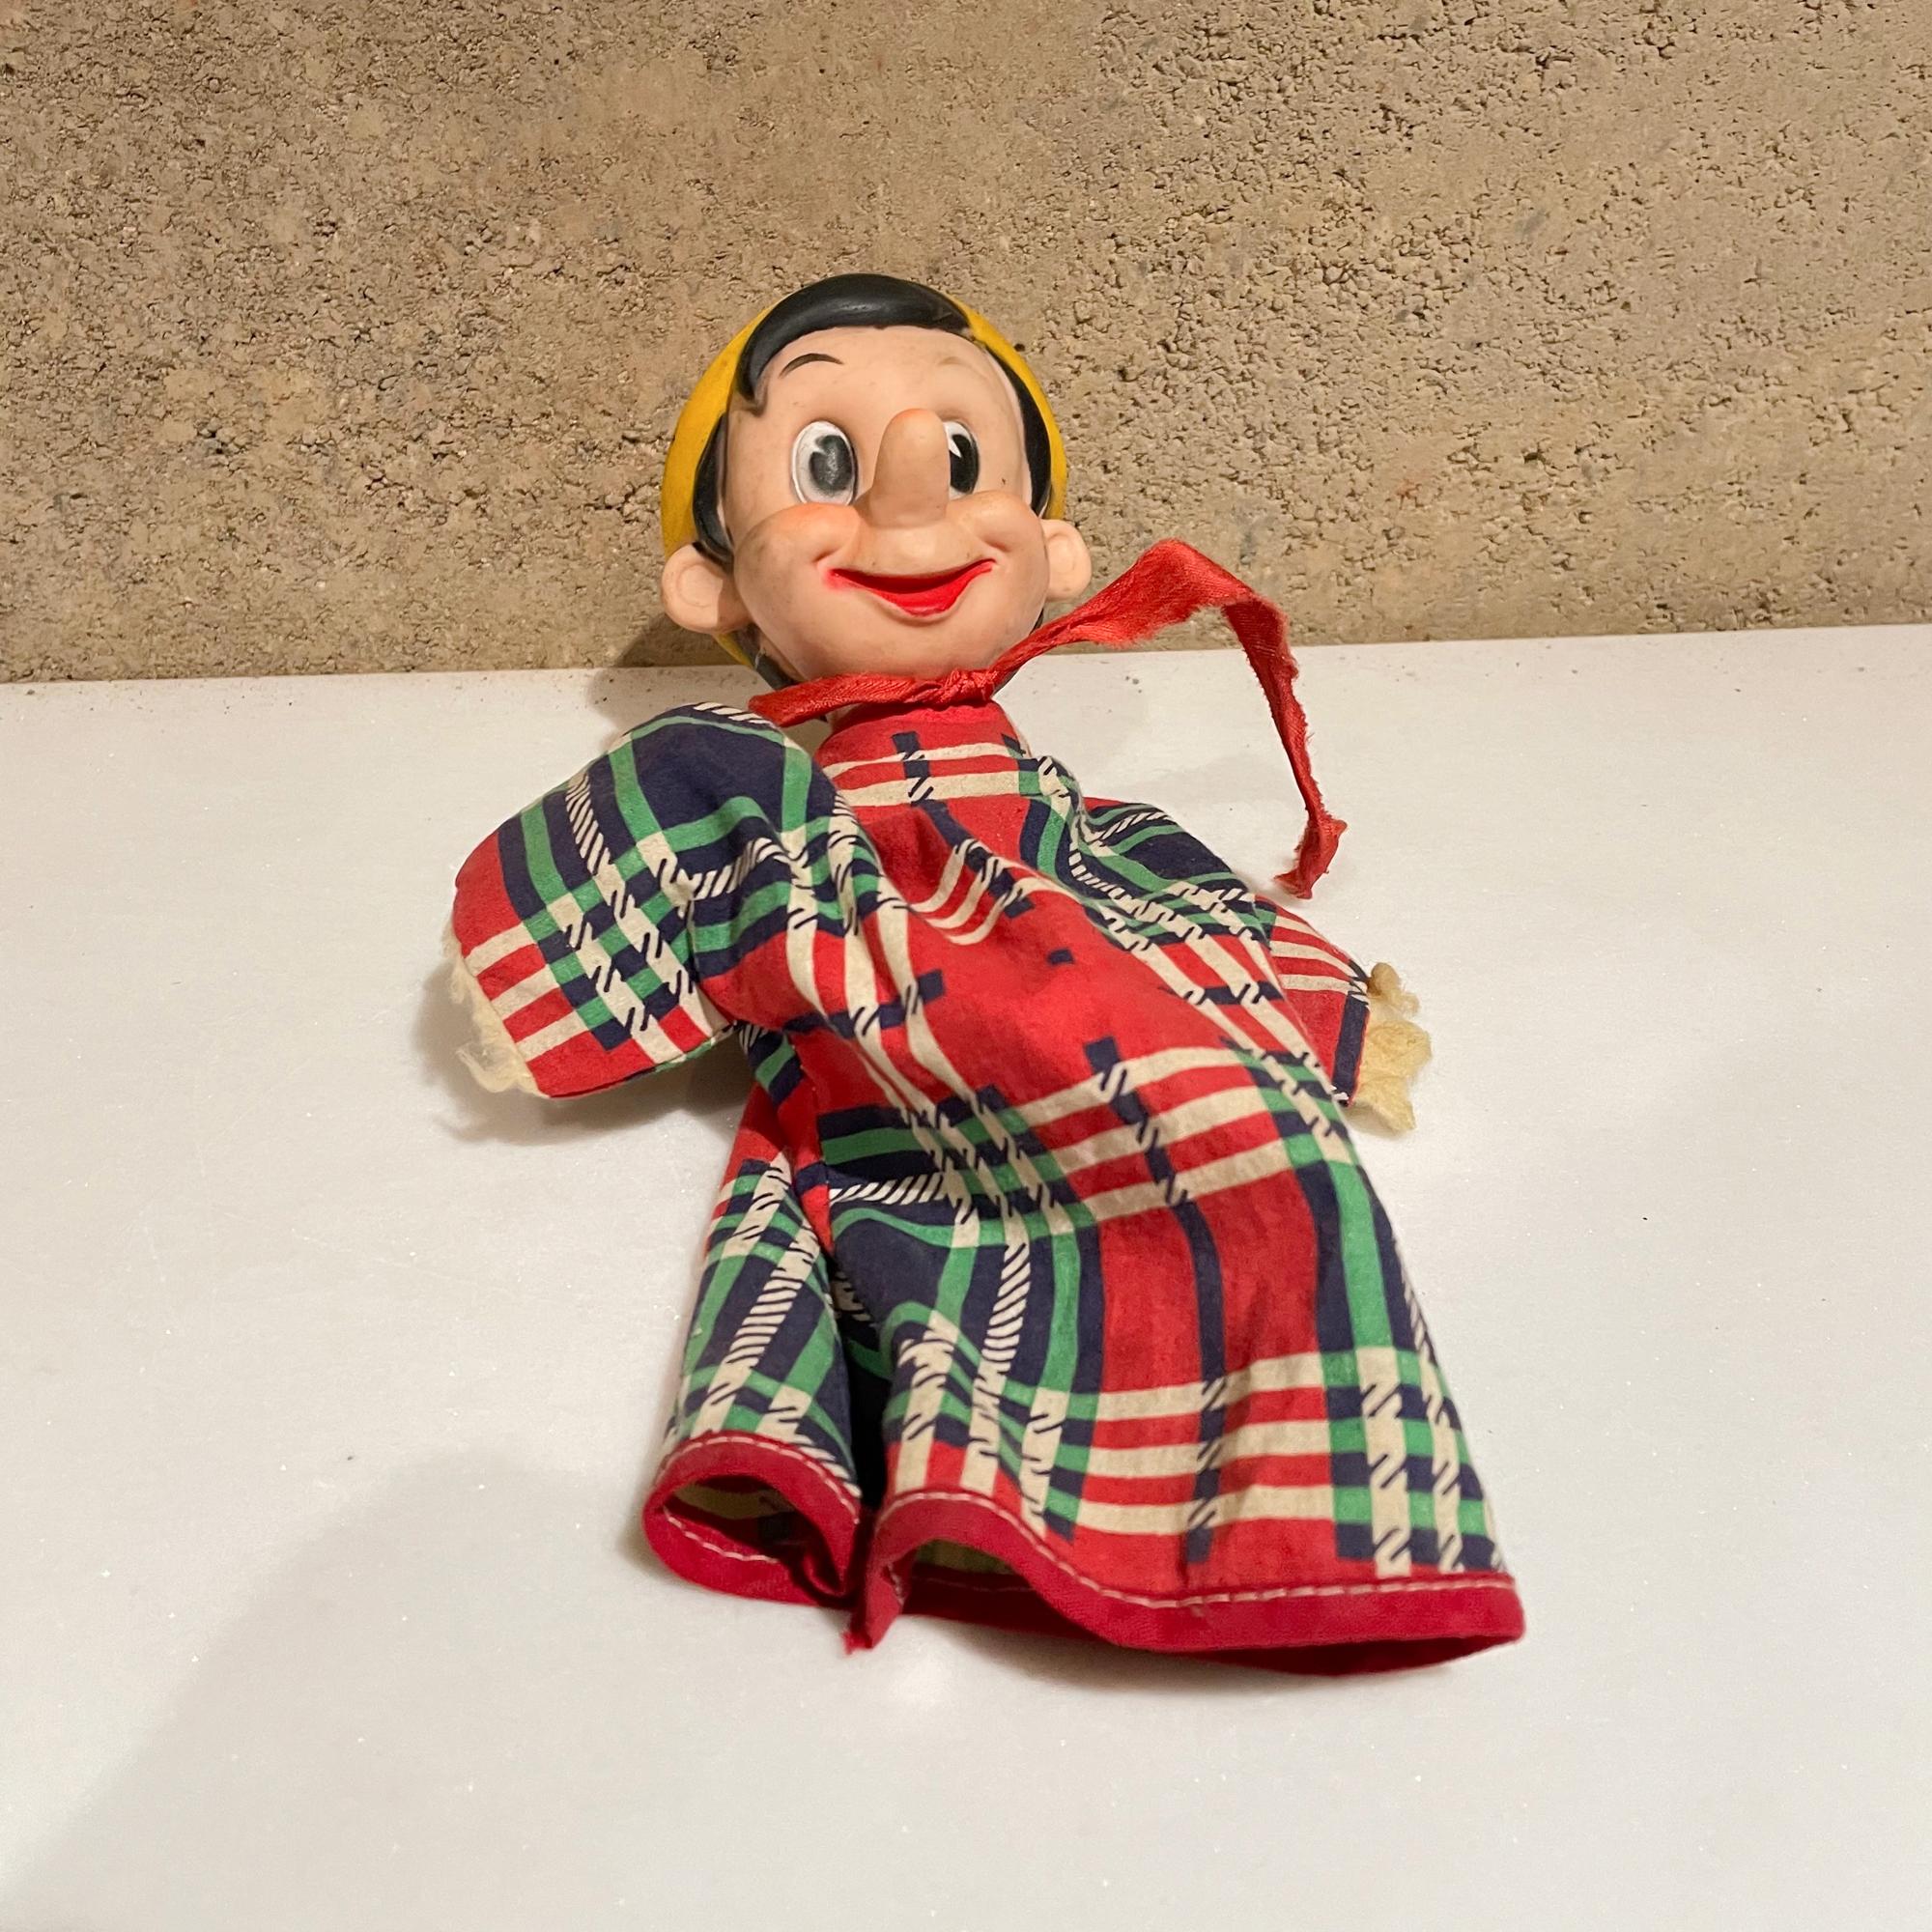 Pinocchio
Walt Disney's Pinocchio 1950s hand puppet vintage by Gund Mfg New York
Measures: 10 H x 7 W x 2.75 inches
Maker label present.
Original unrestored preowned vintage. See our images.
  
  